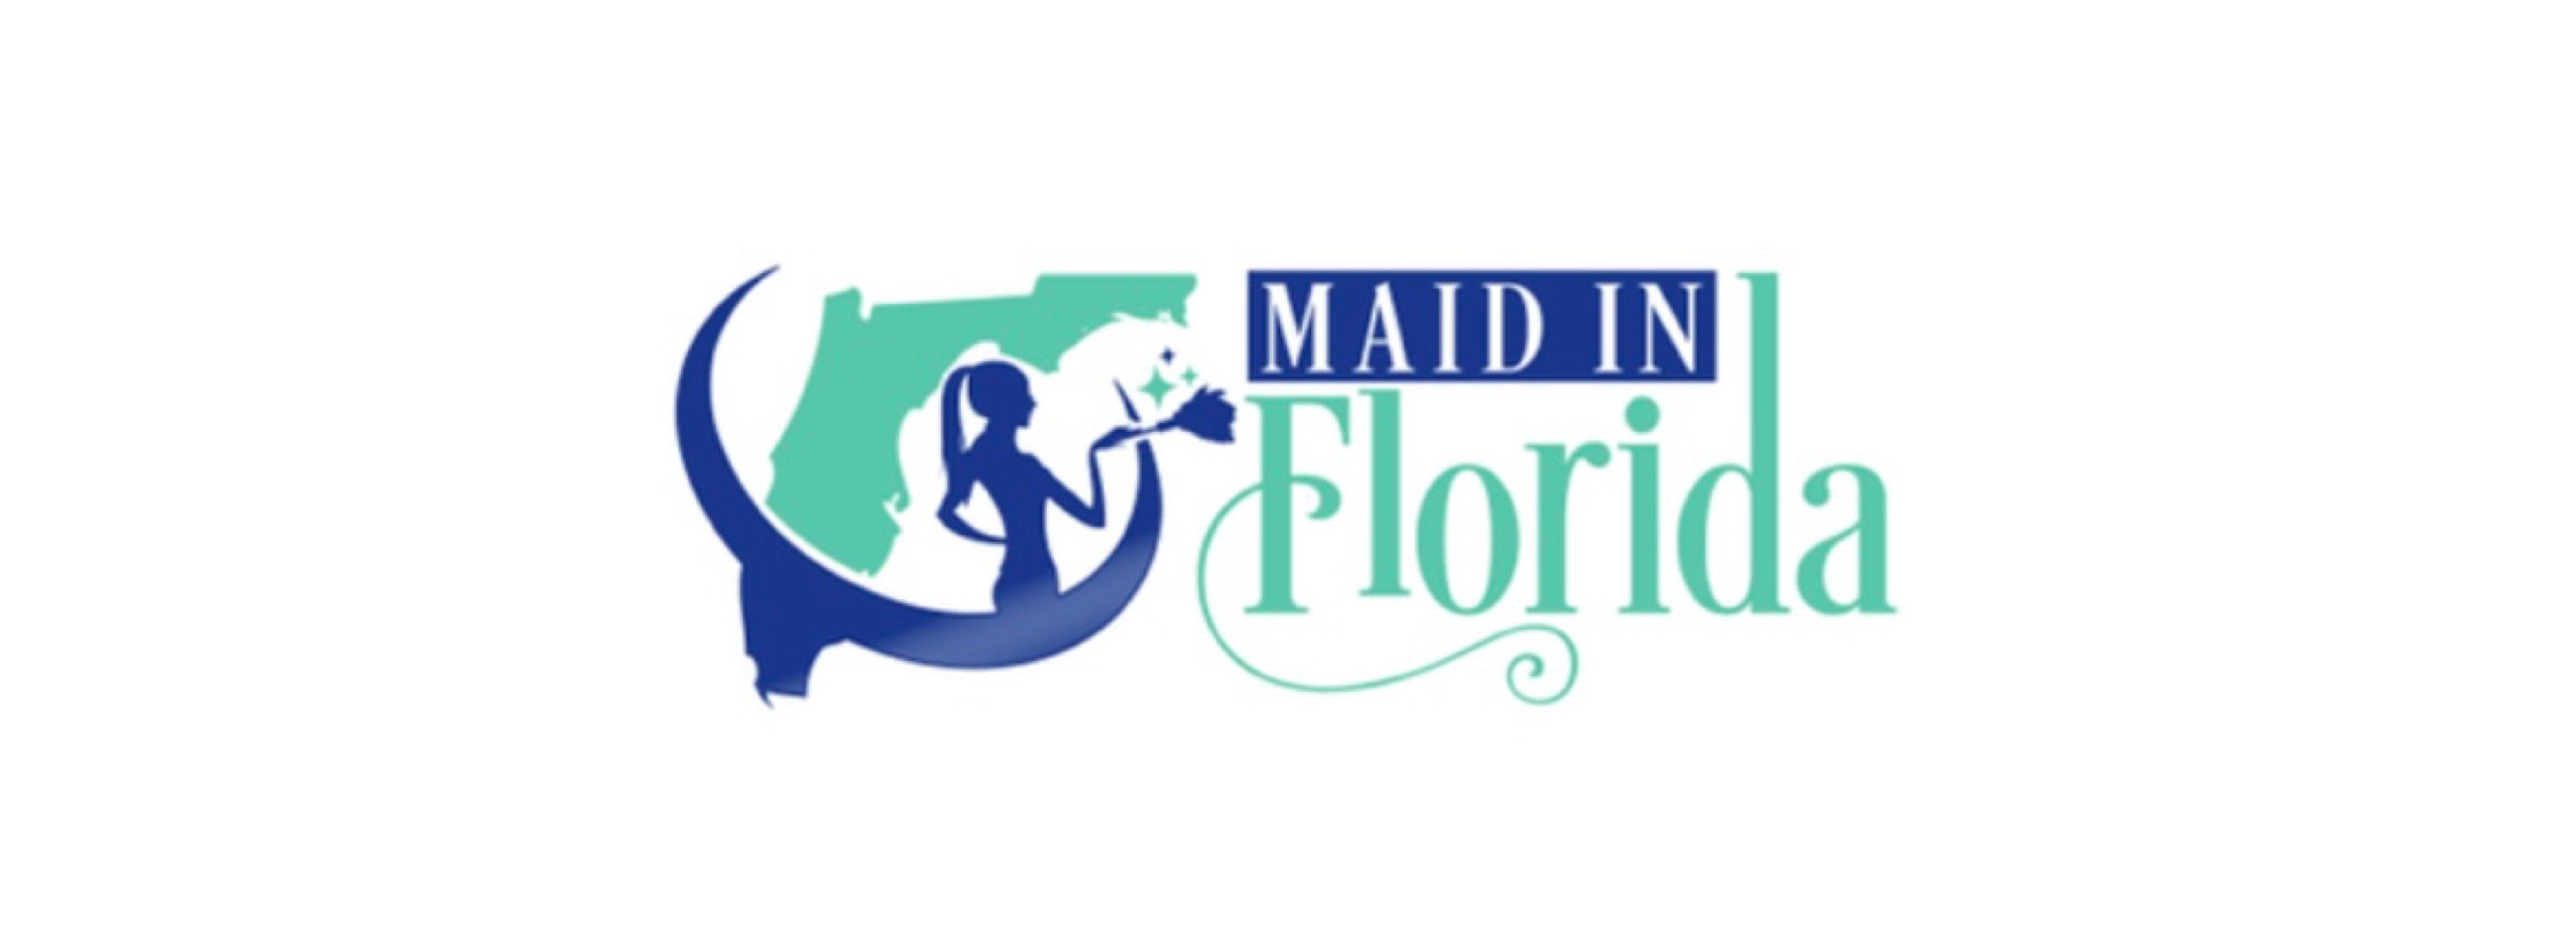 Maid In Florida Cleaning Services Logo